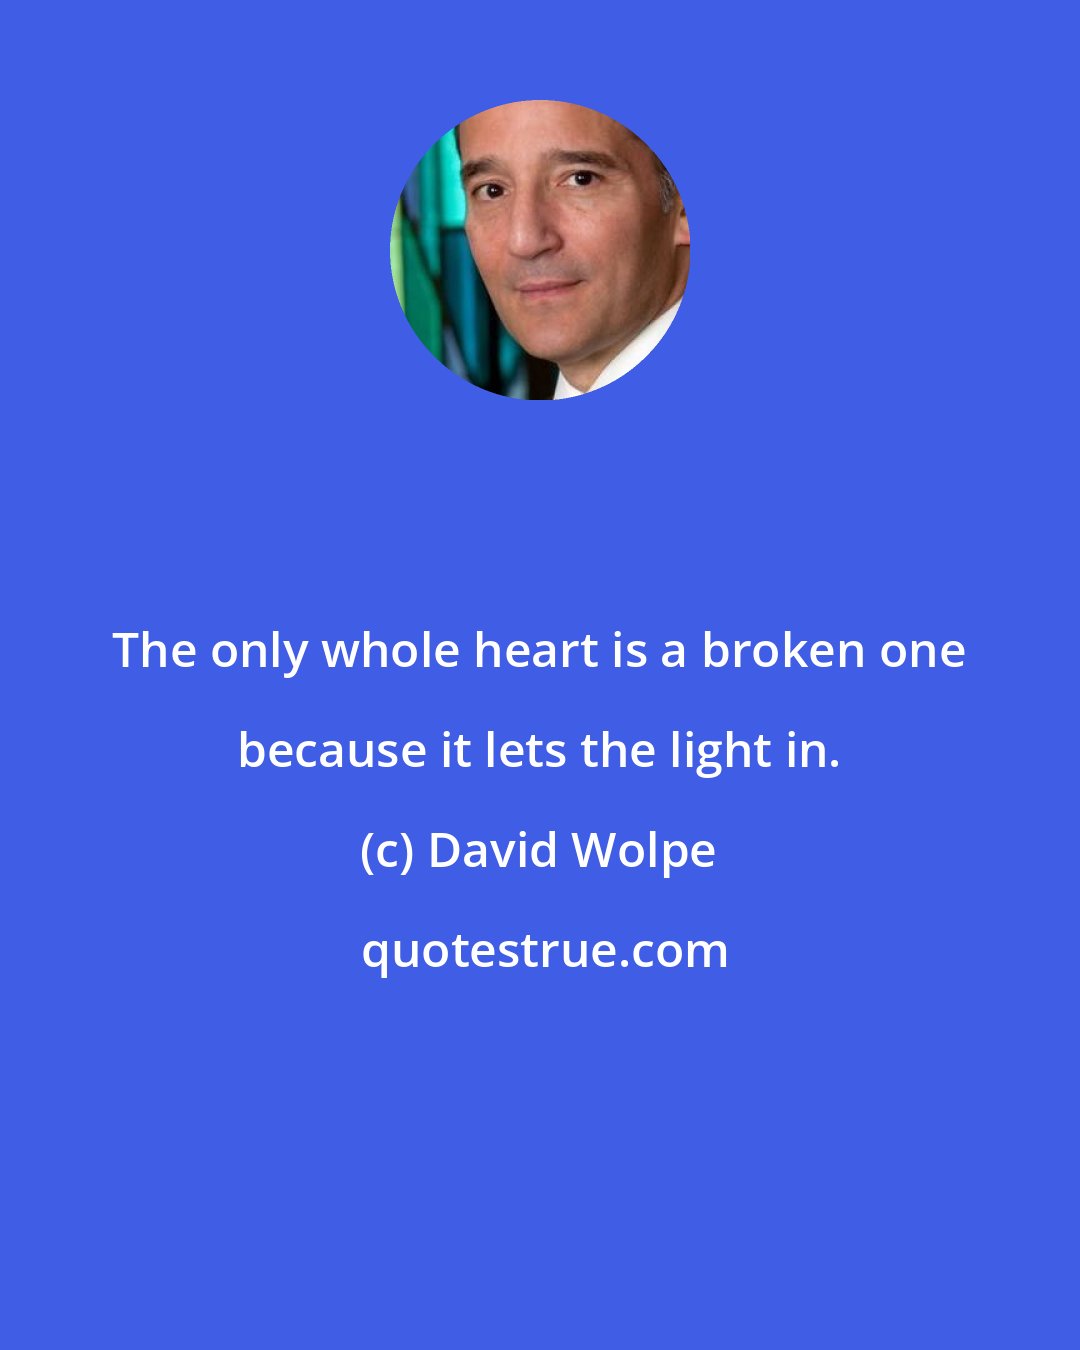 David Wolpe: The only whole heart is a broken one because it lets the light in.